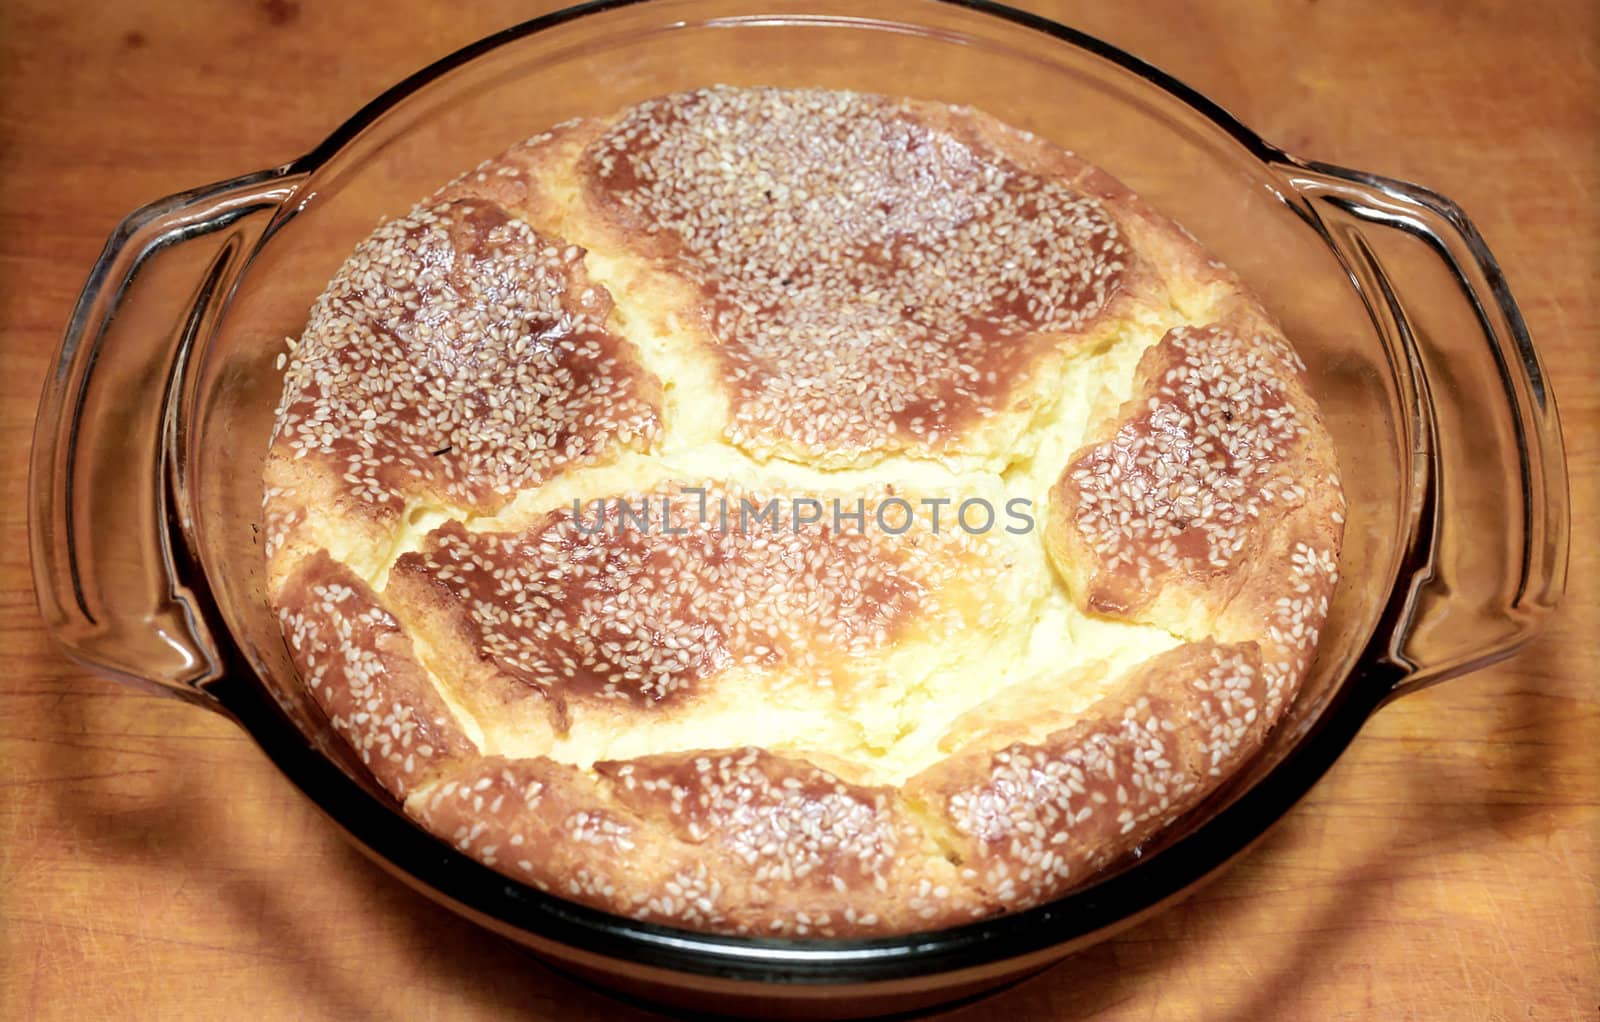 Cheese pie with sesame seeds in glass baking dish on wooden surface